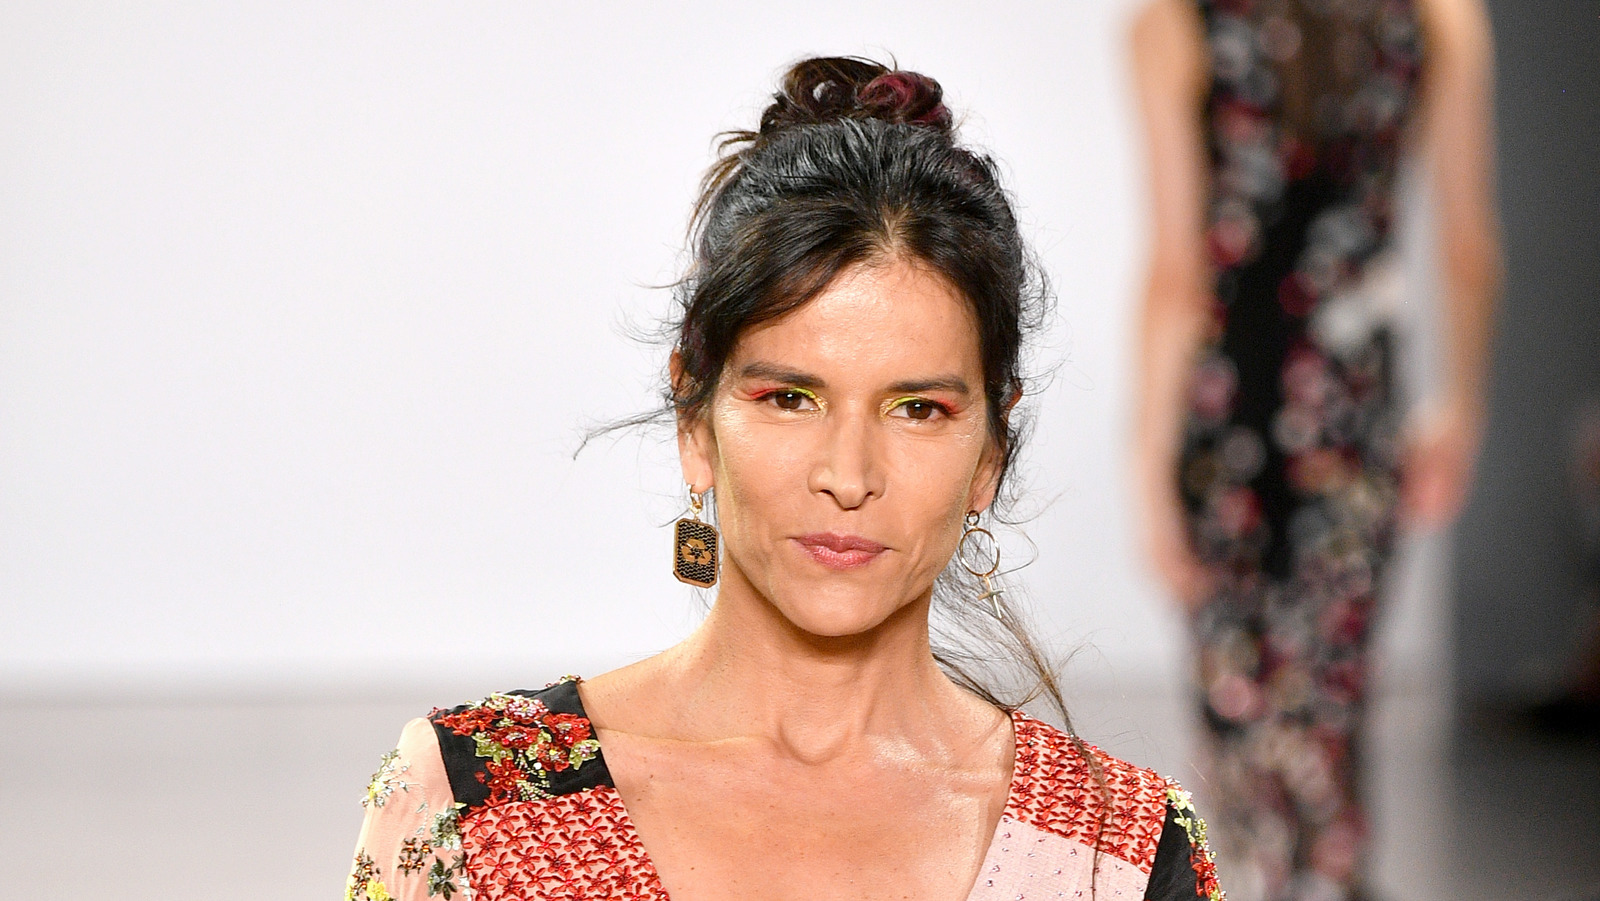 Here's What Patricia Velasquez Has Been Doing Since The Mumm